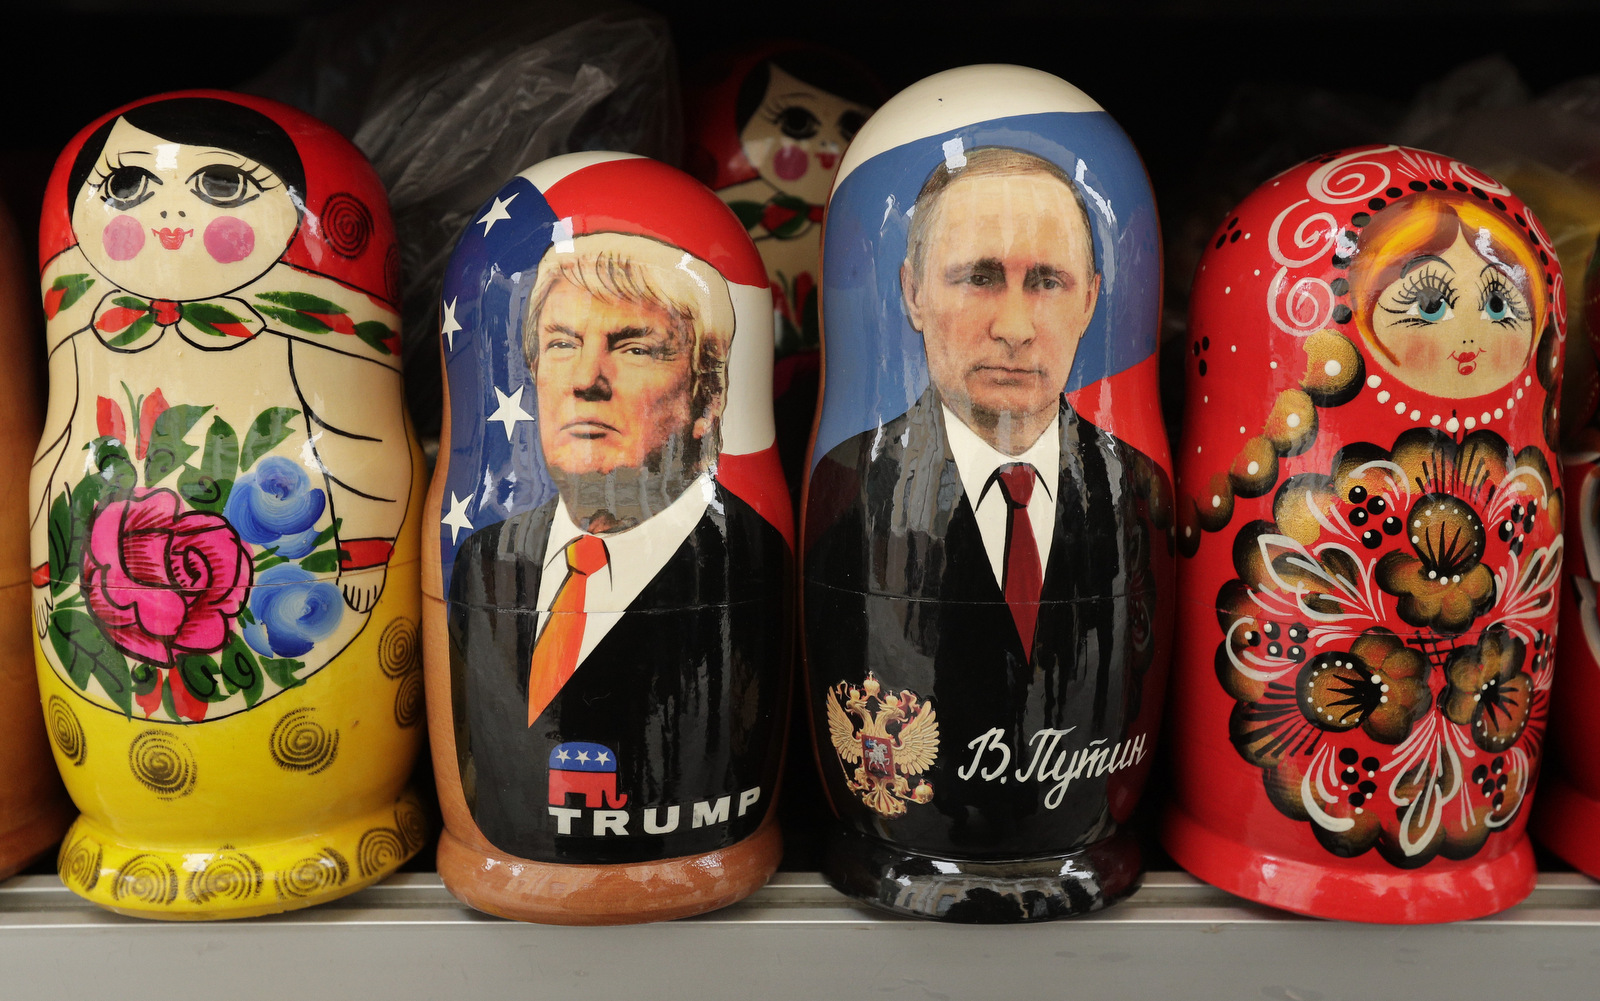 Traditional Russian wooden dolls called Matryoshka are displayed at a souvenir street shop in St.Petersburg, Russia. (AP/Dmitri Lovetsky)